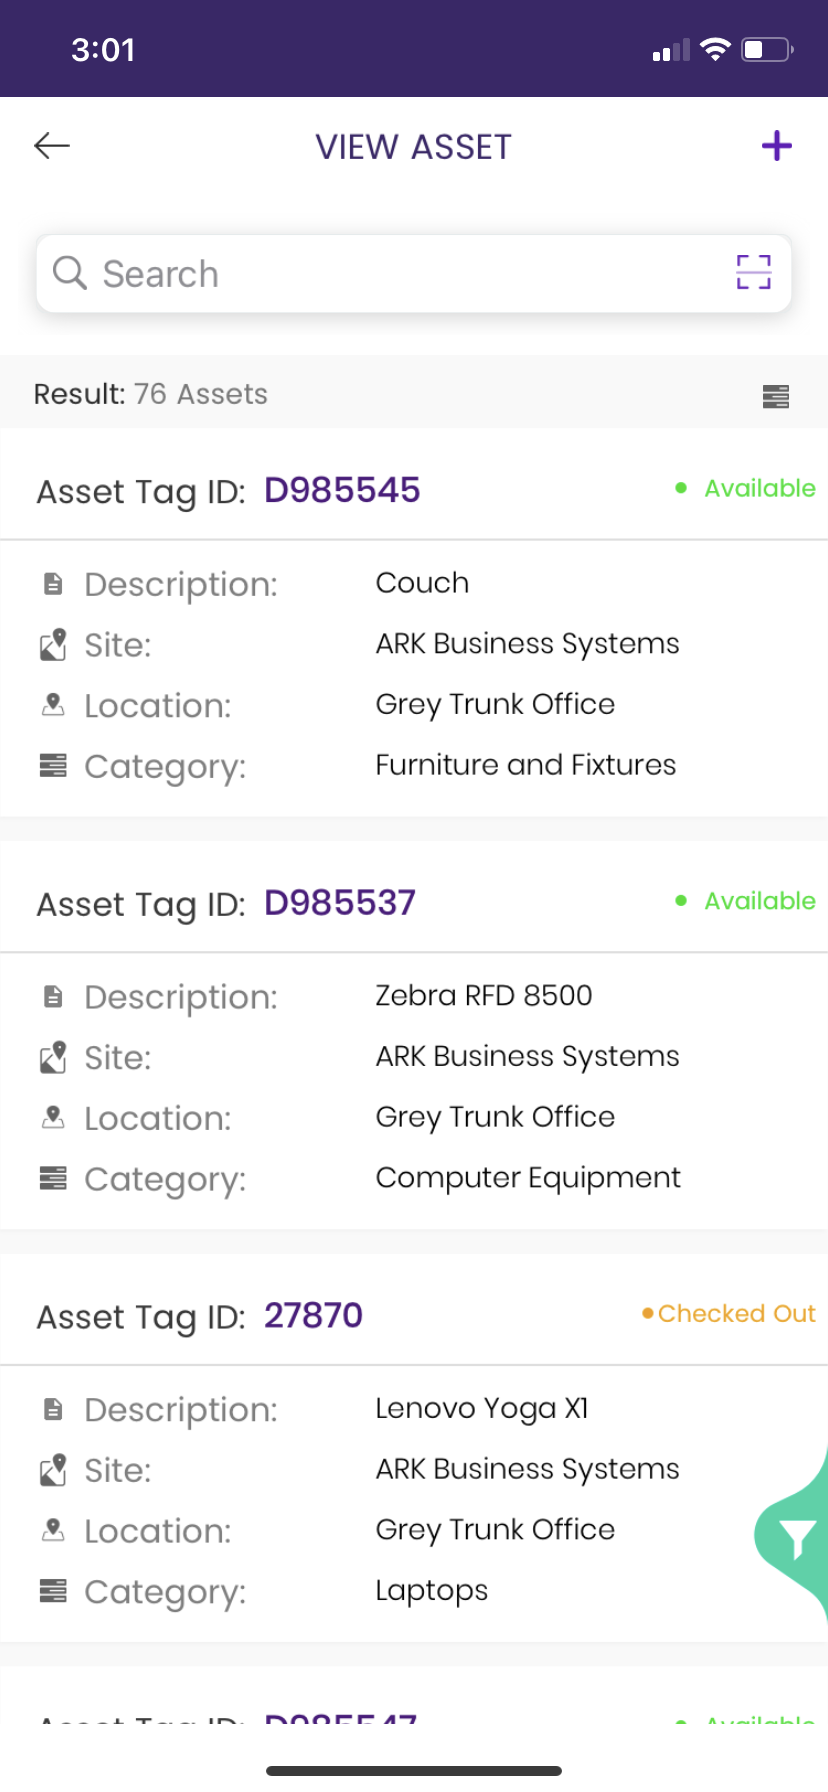 View Asset Screen on Mobile App